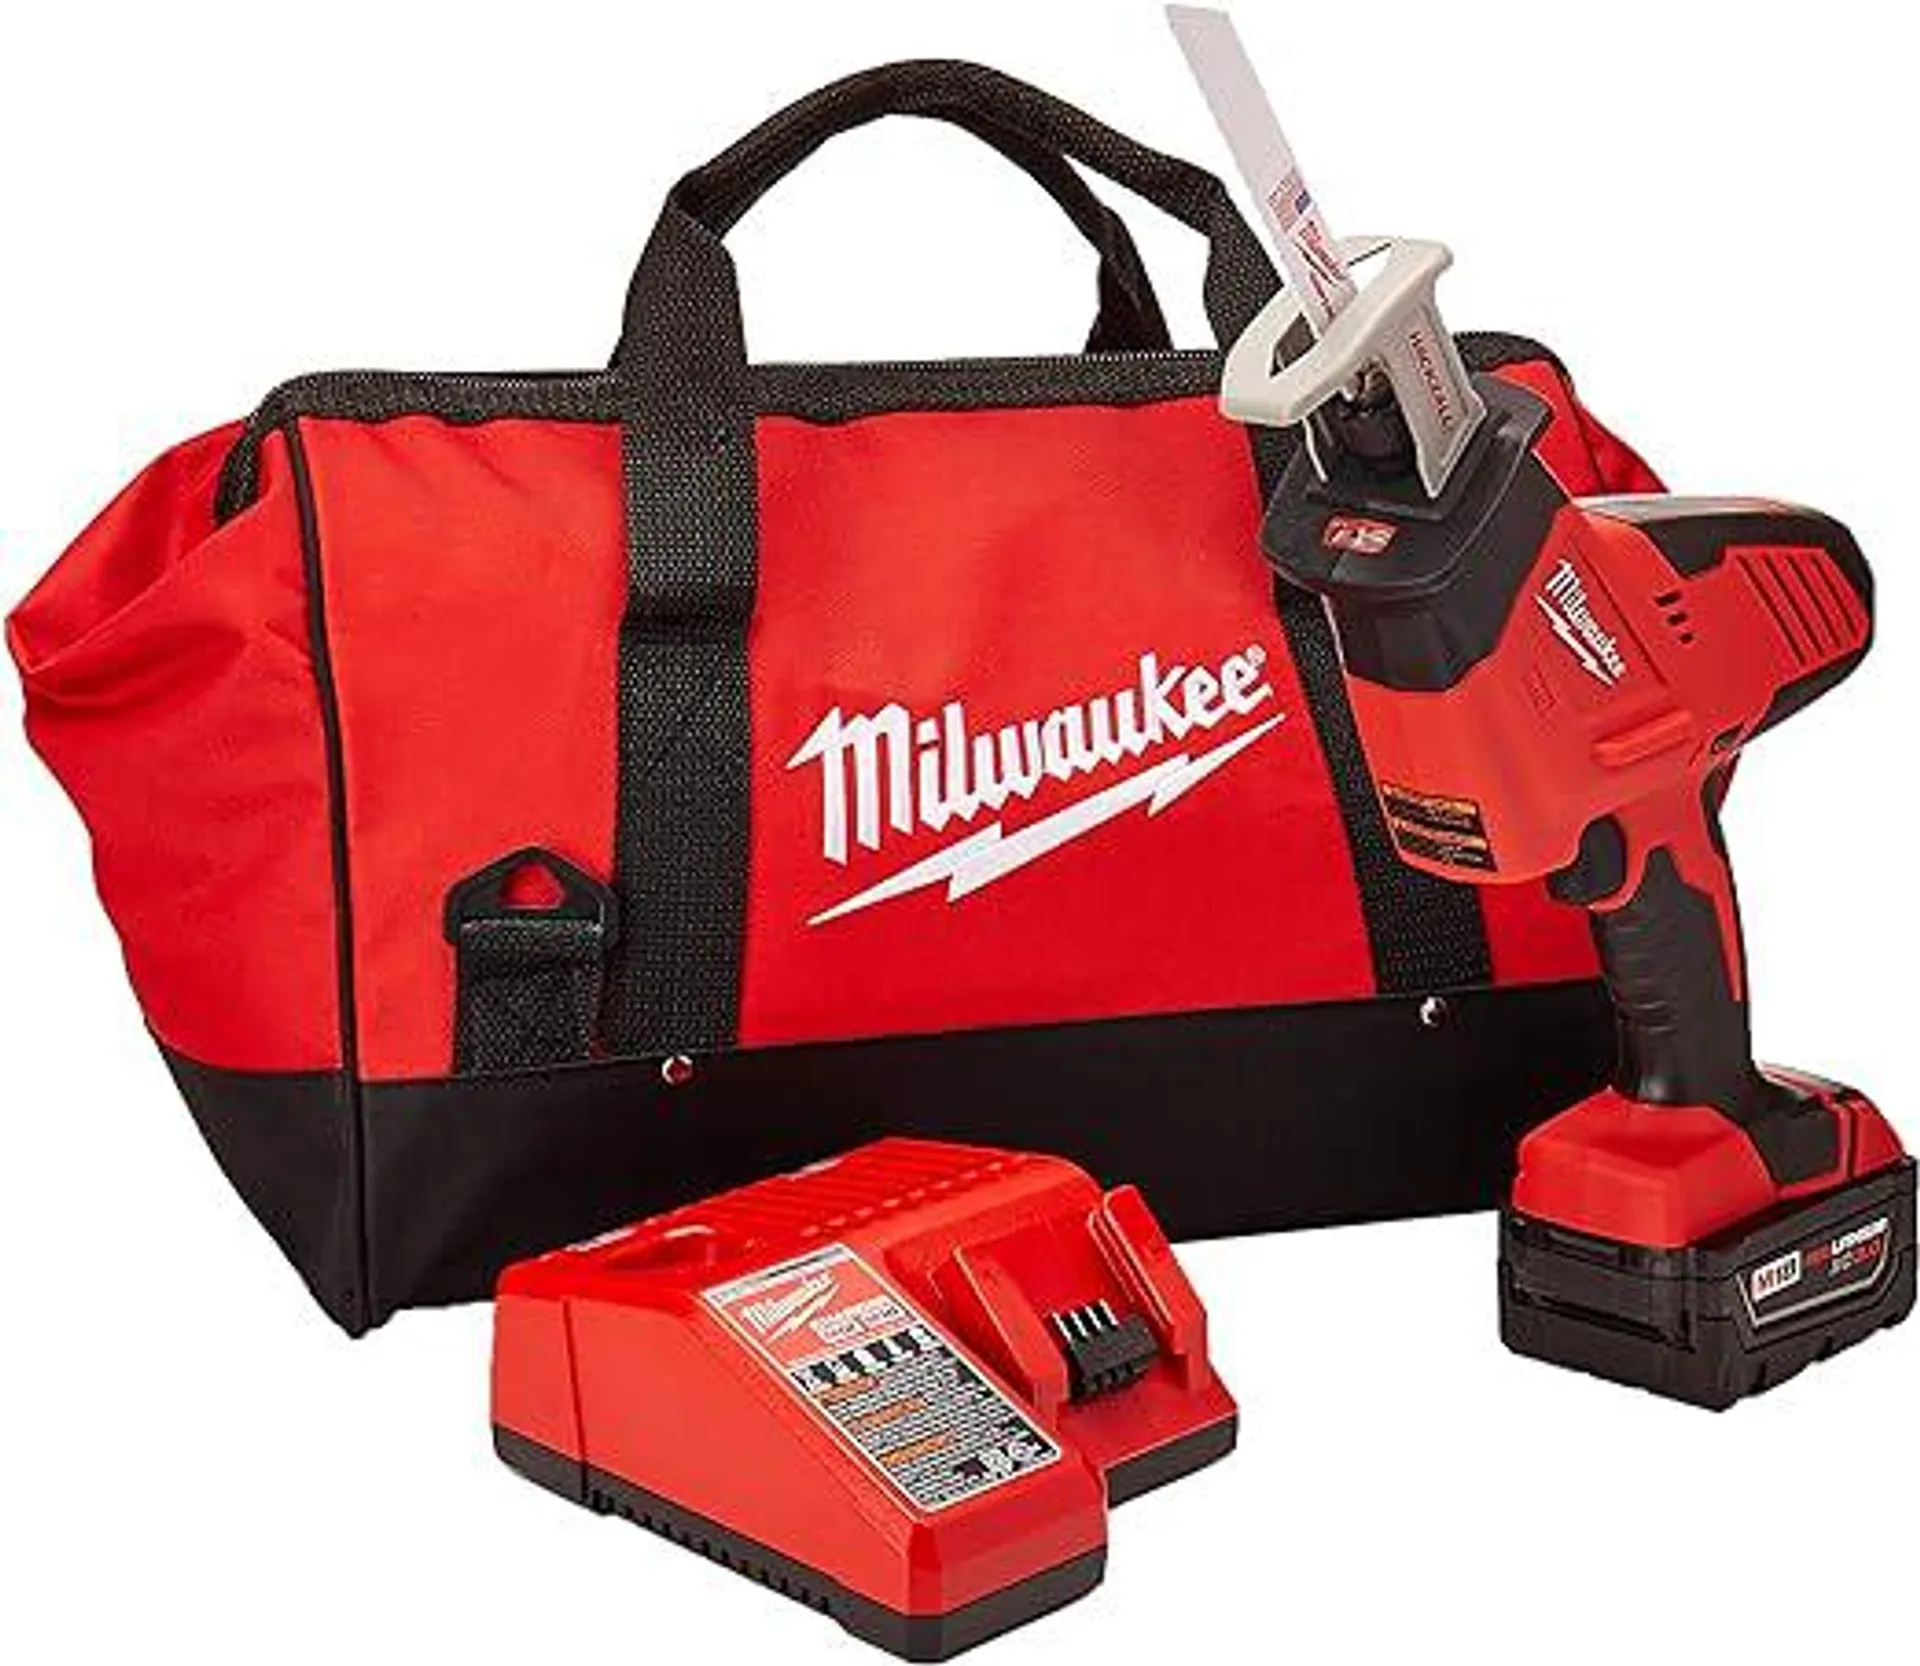 Milwaukee 2625-21 M18 18V Hackzall Cordless One-Handed Reciprocating Saw Kit